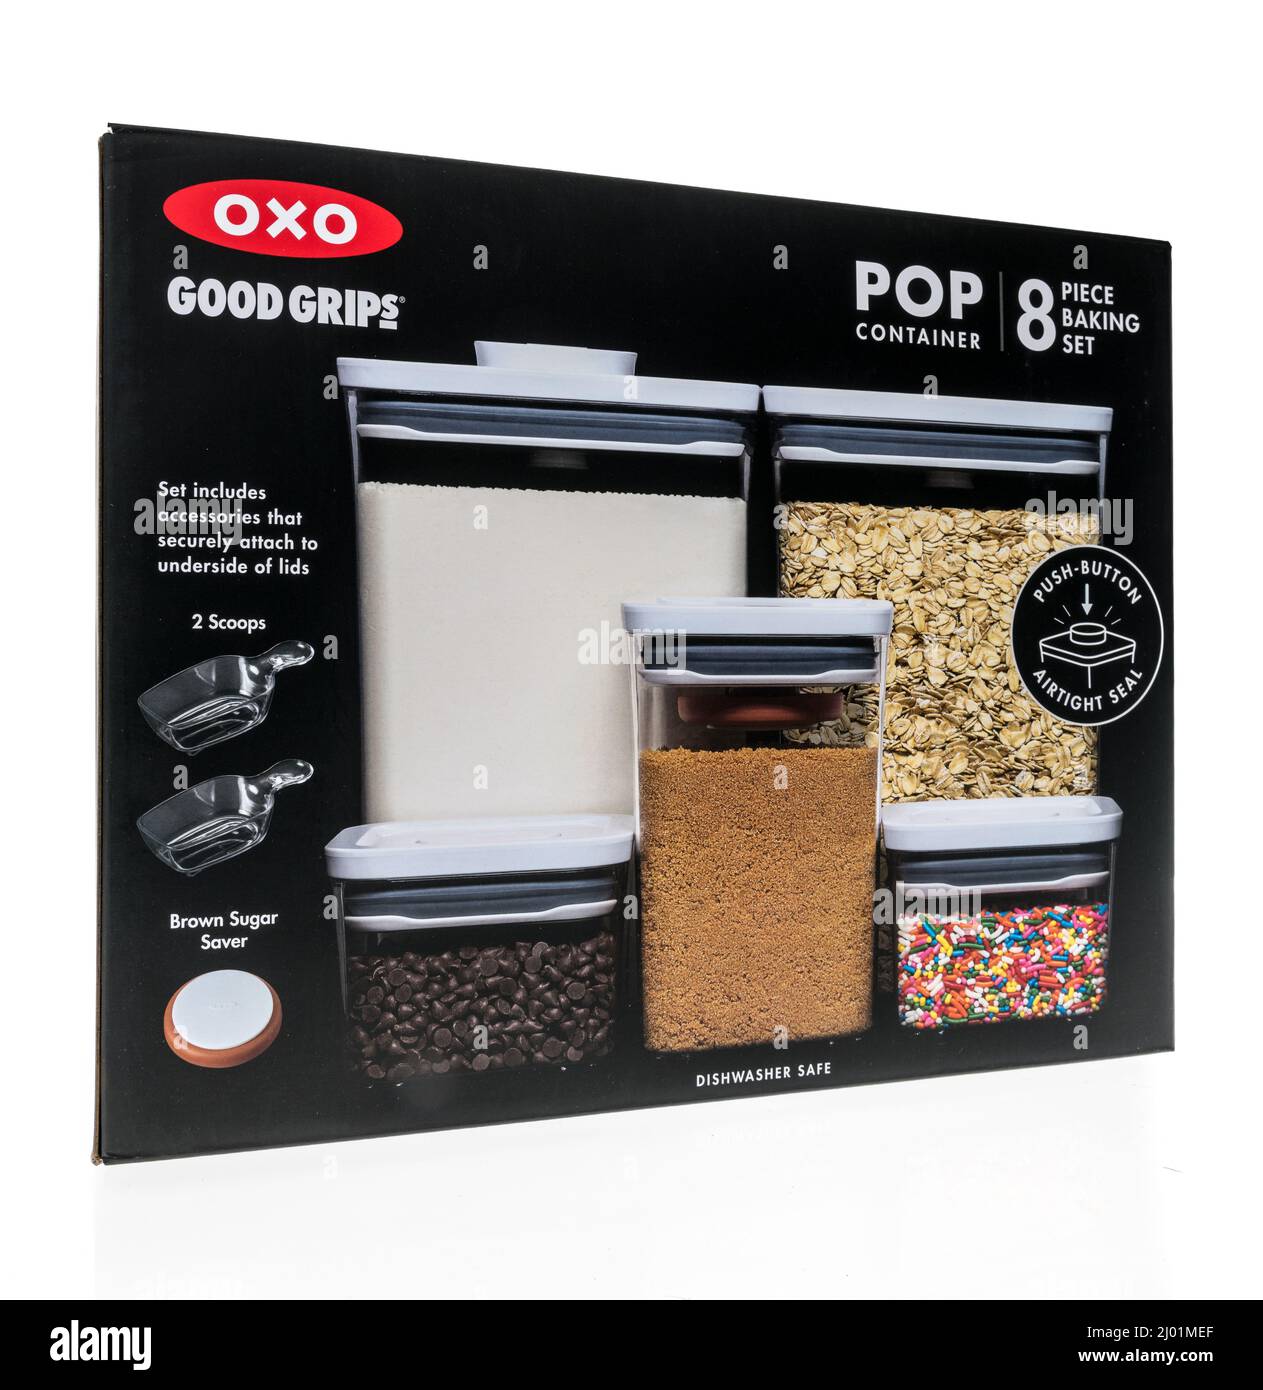 Oxo Good Grips Baking Set, Pop Container, 8 Piece